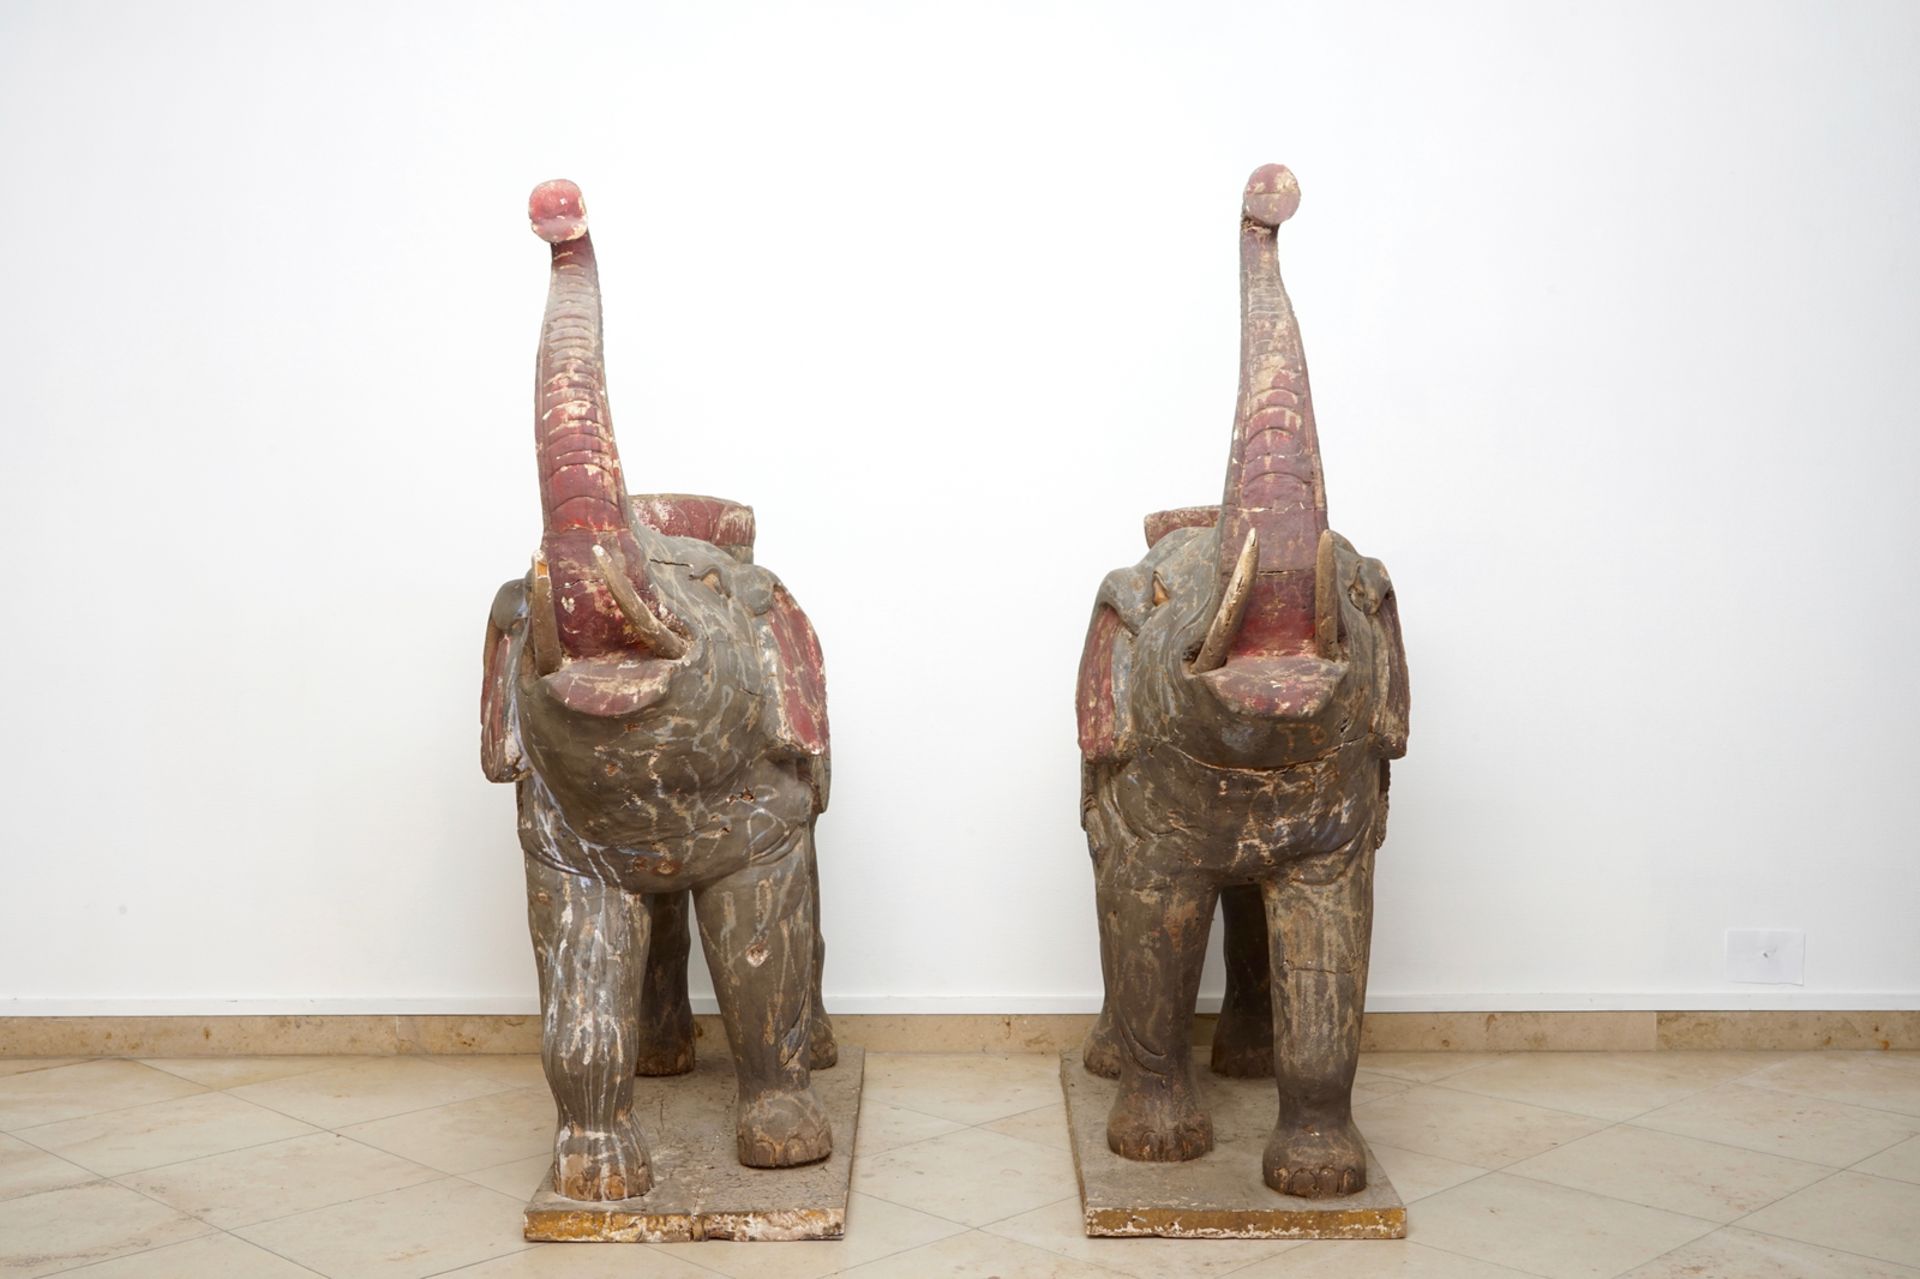 A pair of large wooden polychrome elephants, South-East Asia, 20th C. H.: 156 cm - L.: 141 cm - Image 3 of 8